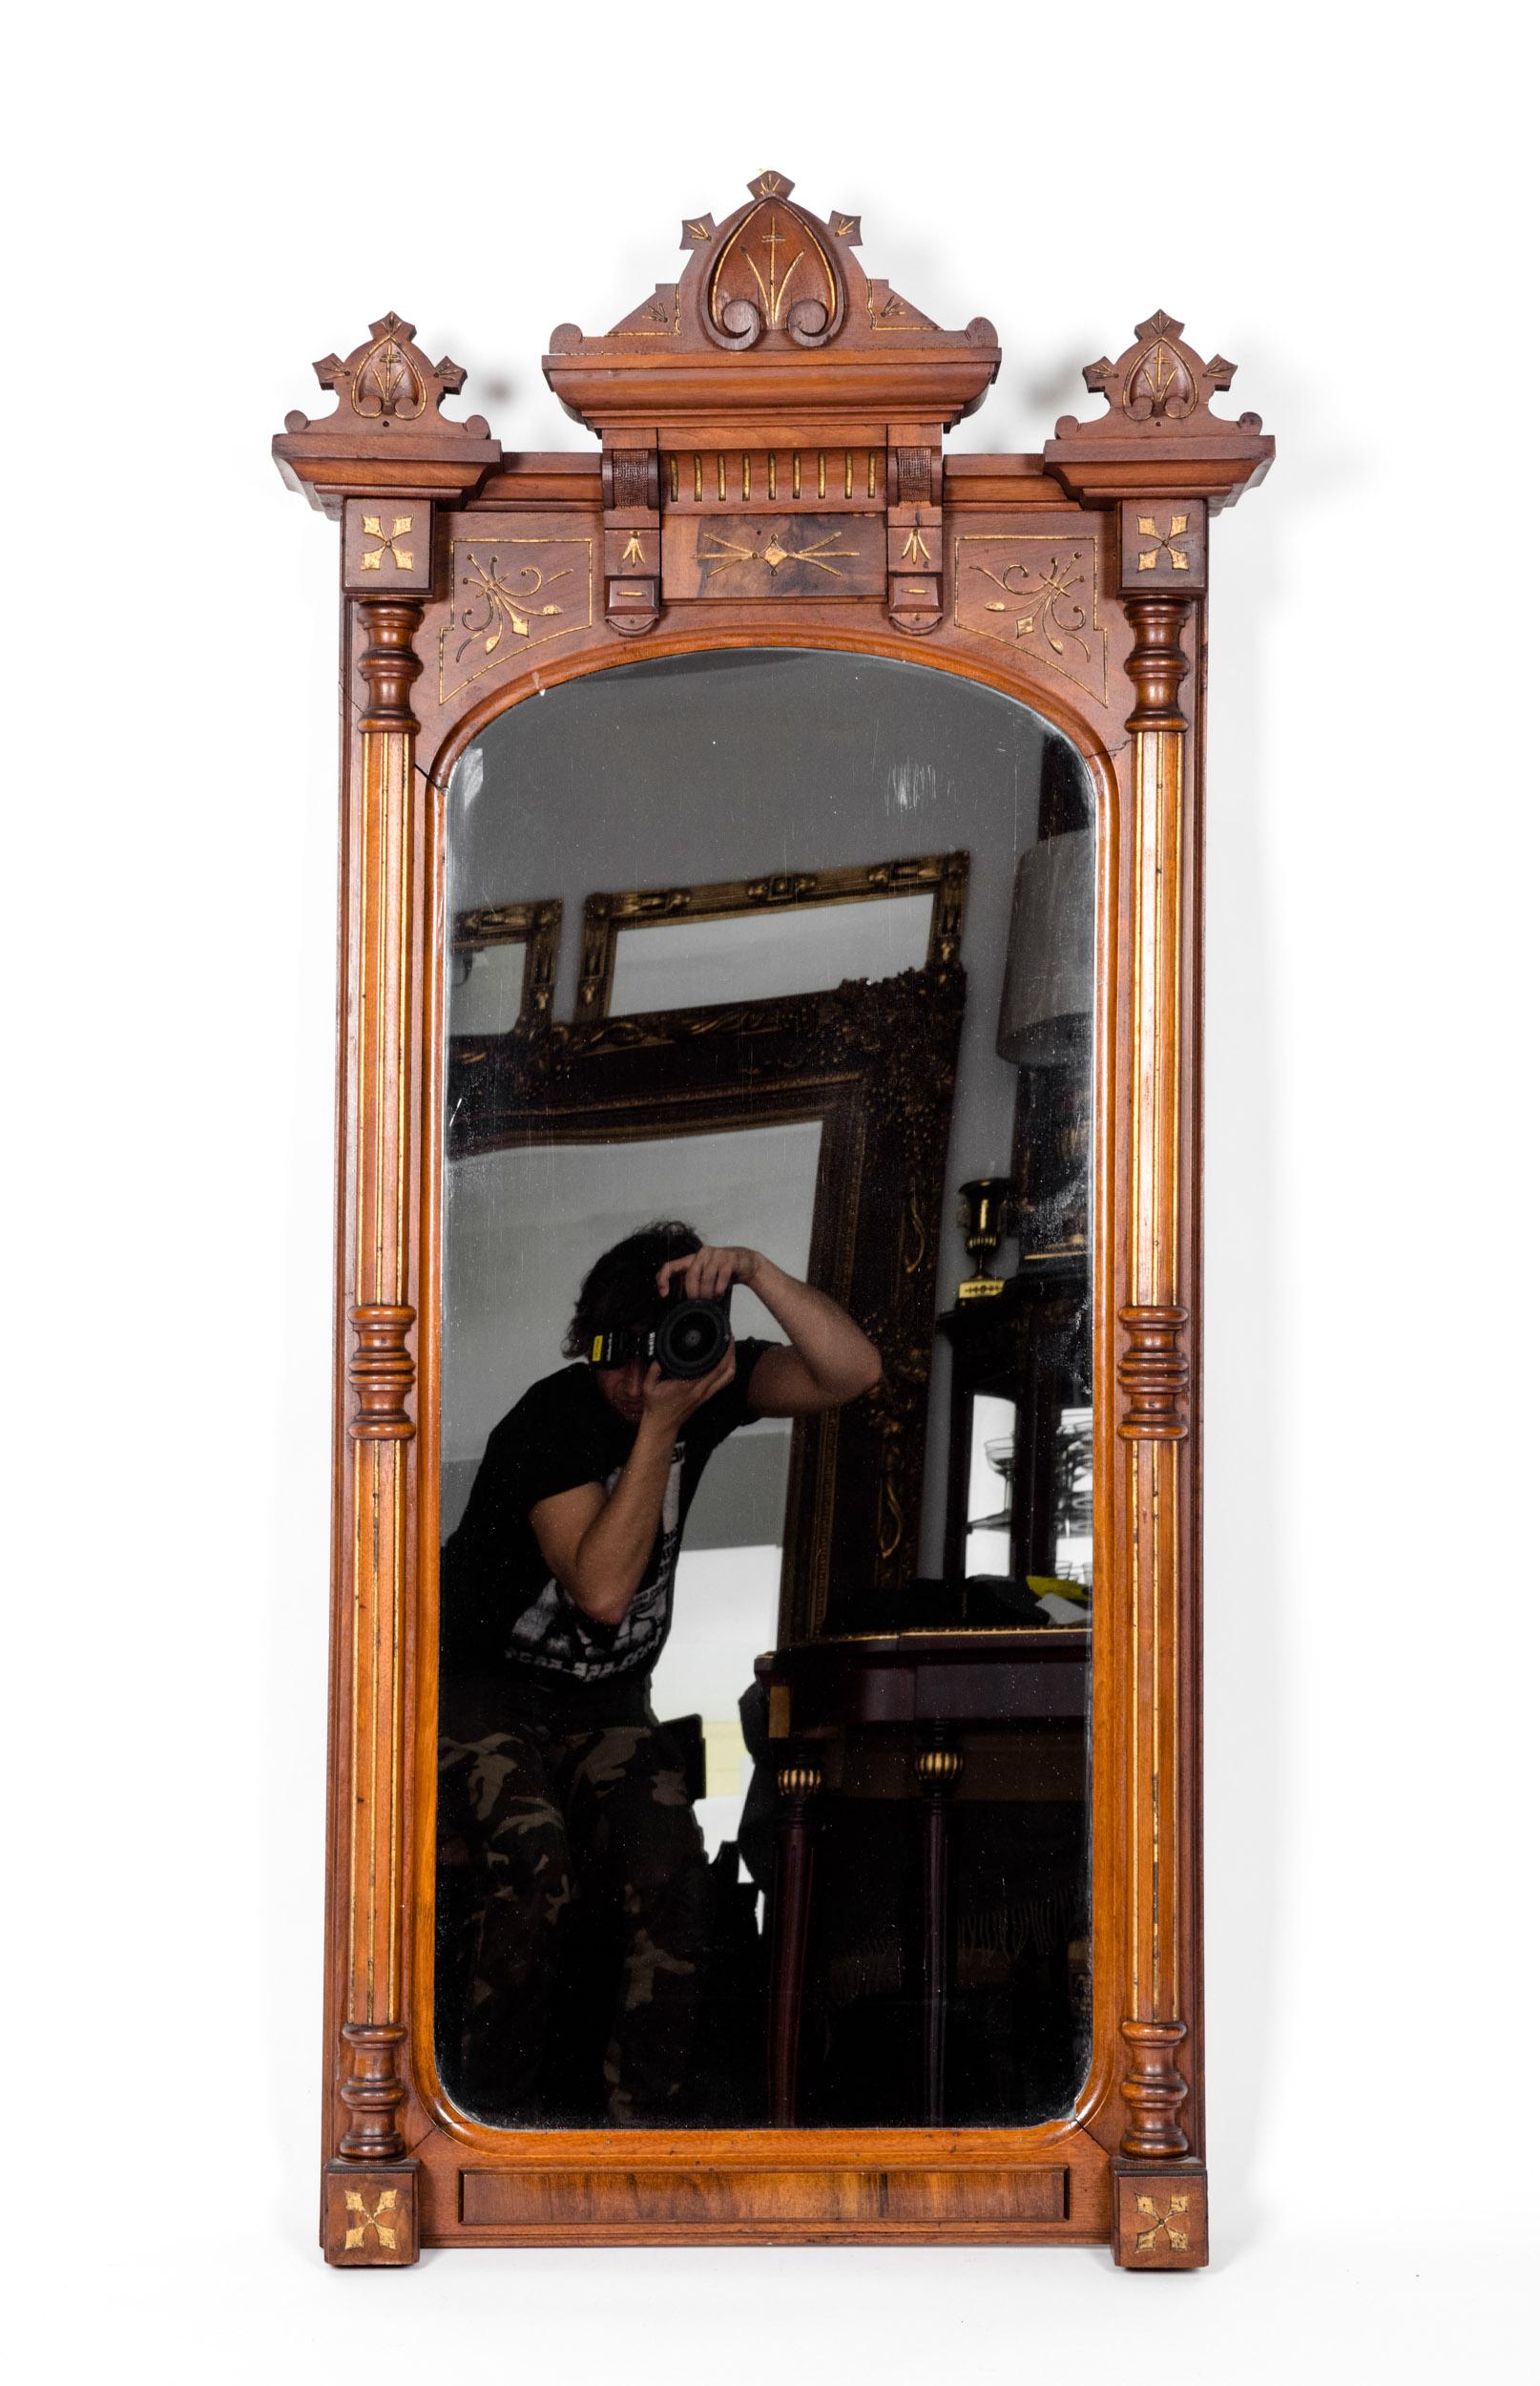 Finely carved mahogany wood framed Victorian style hanging wall mirror with fine carved wood design details. The mirror is in excellent antique condition. Minor wear consistent with age / use. The mirror measure about 53 inches length x 26 inches